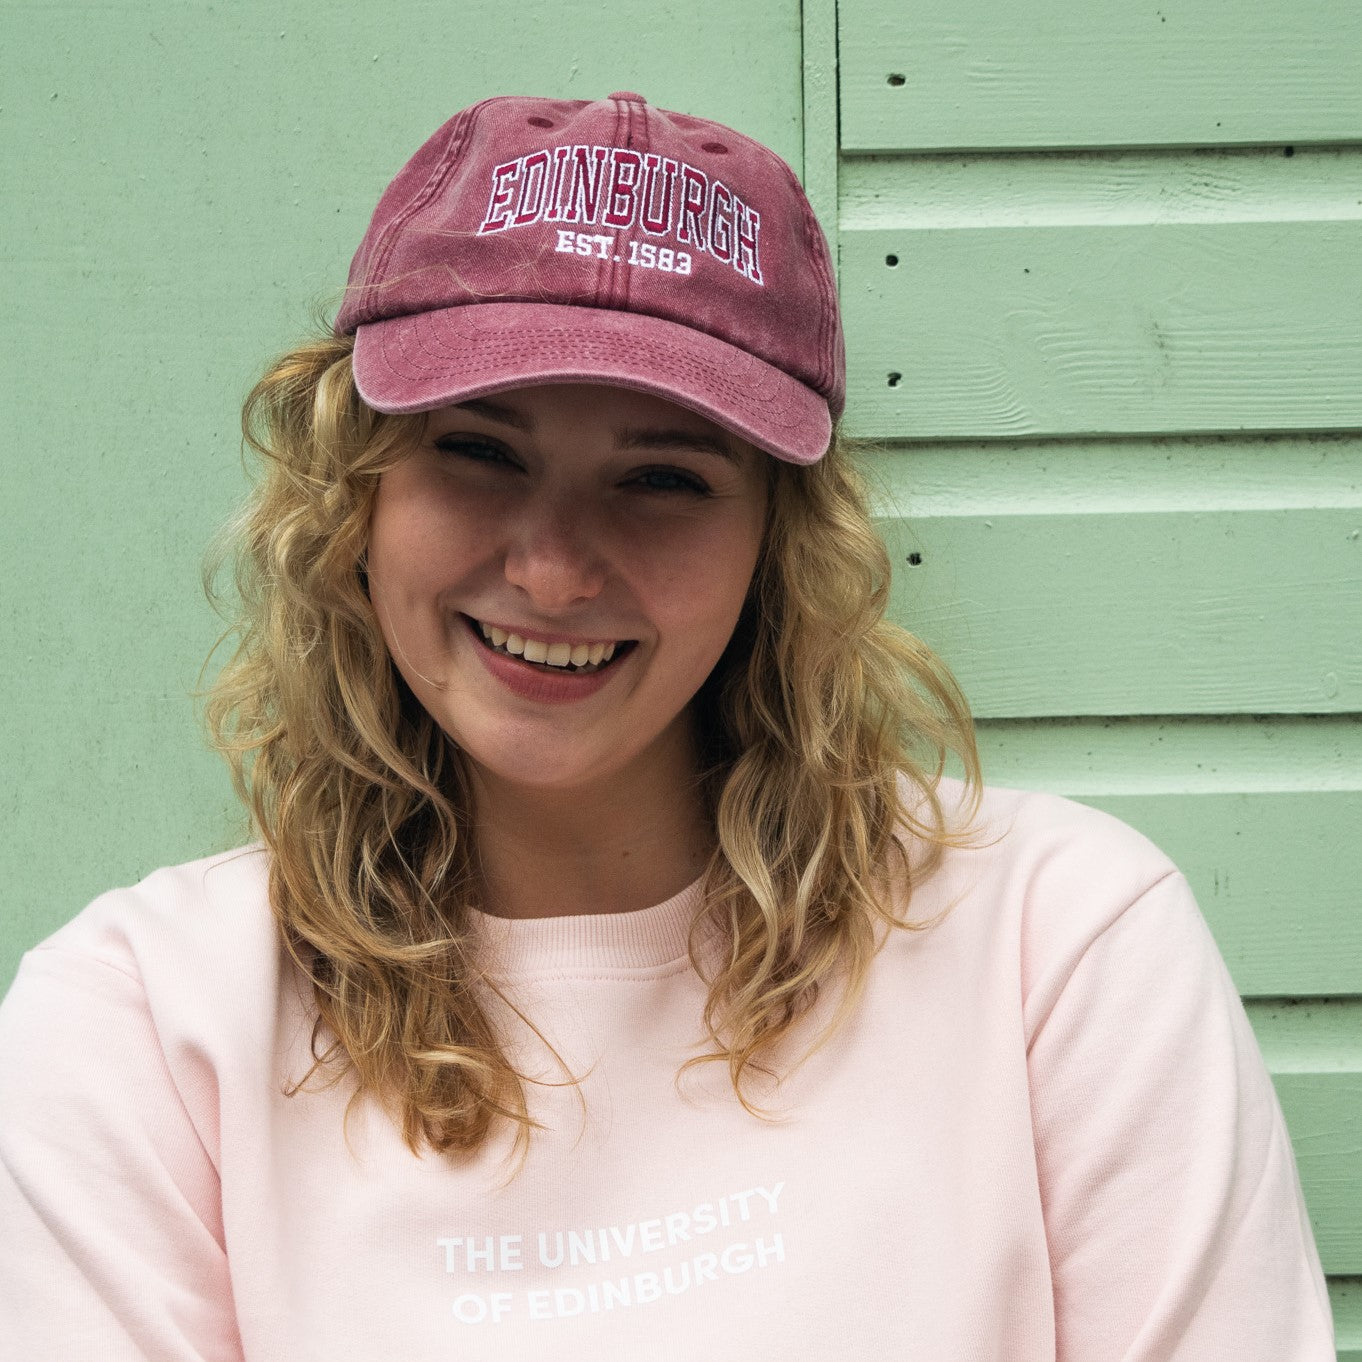 Our model wearing a red baseball cap with red and white text reading 'EDINBURGH EST. 1583'